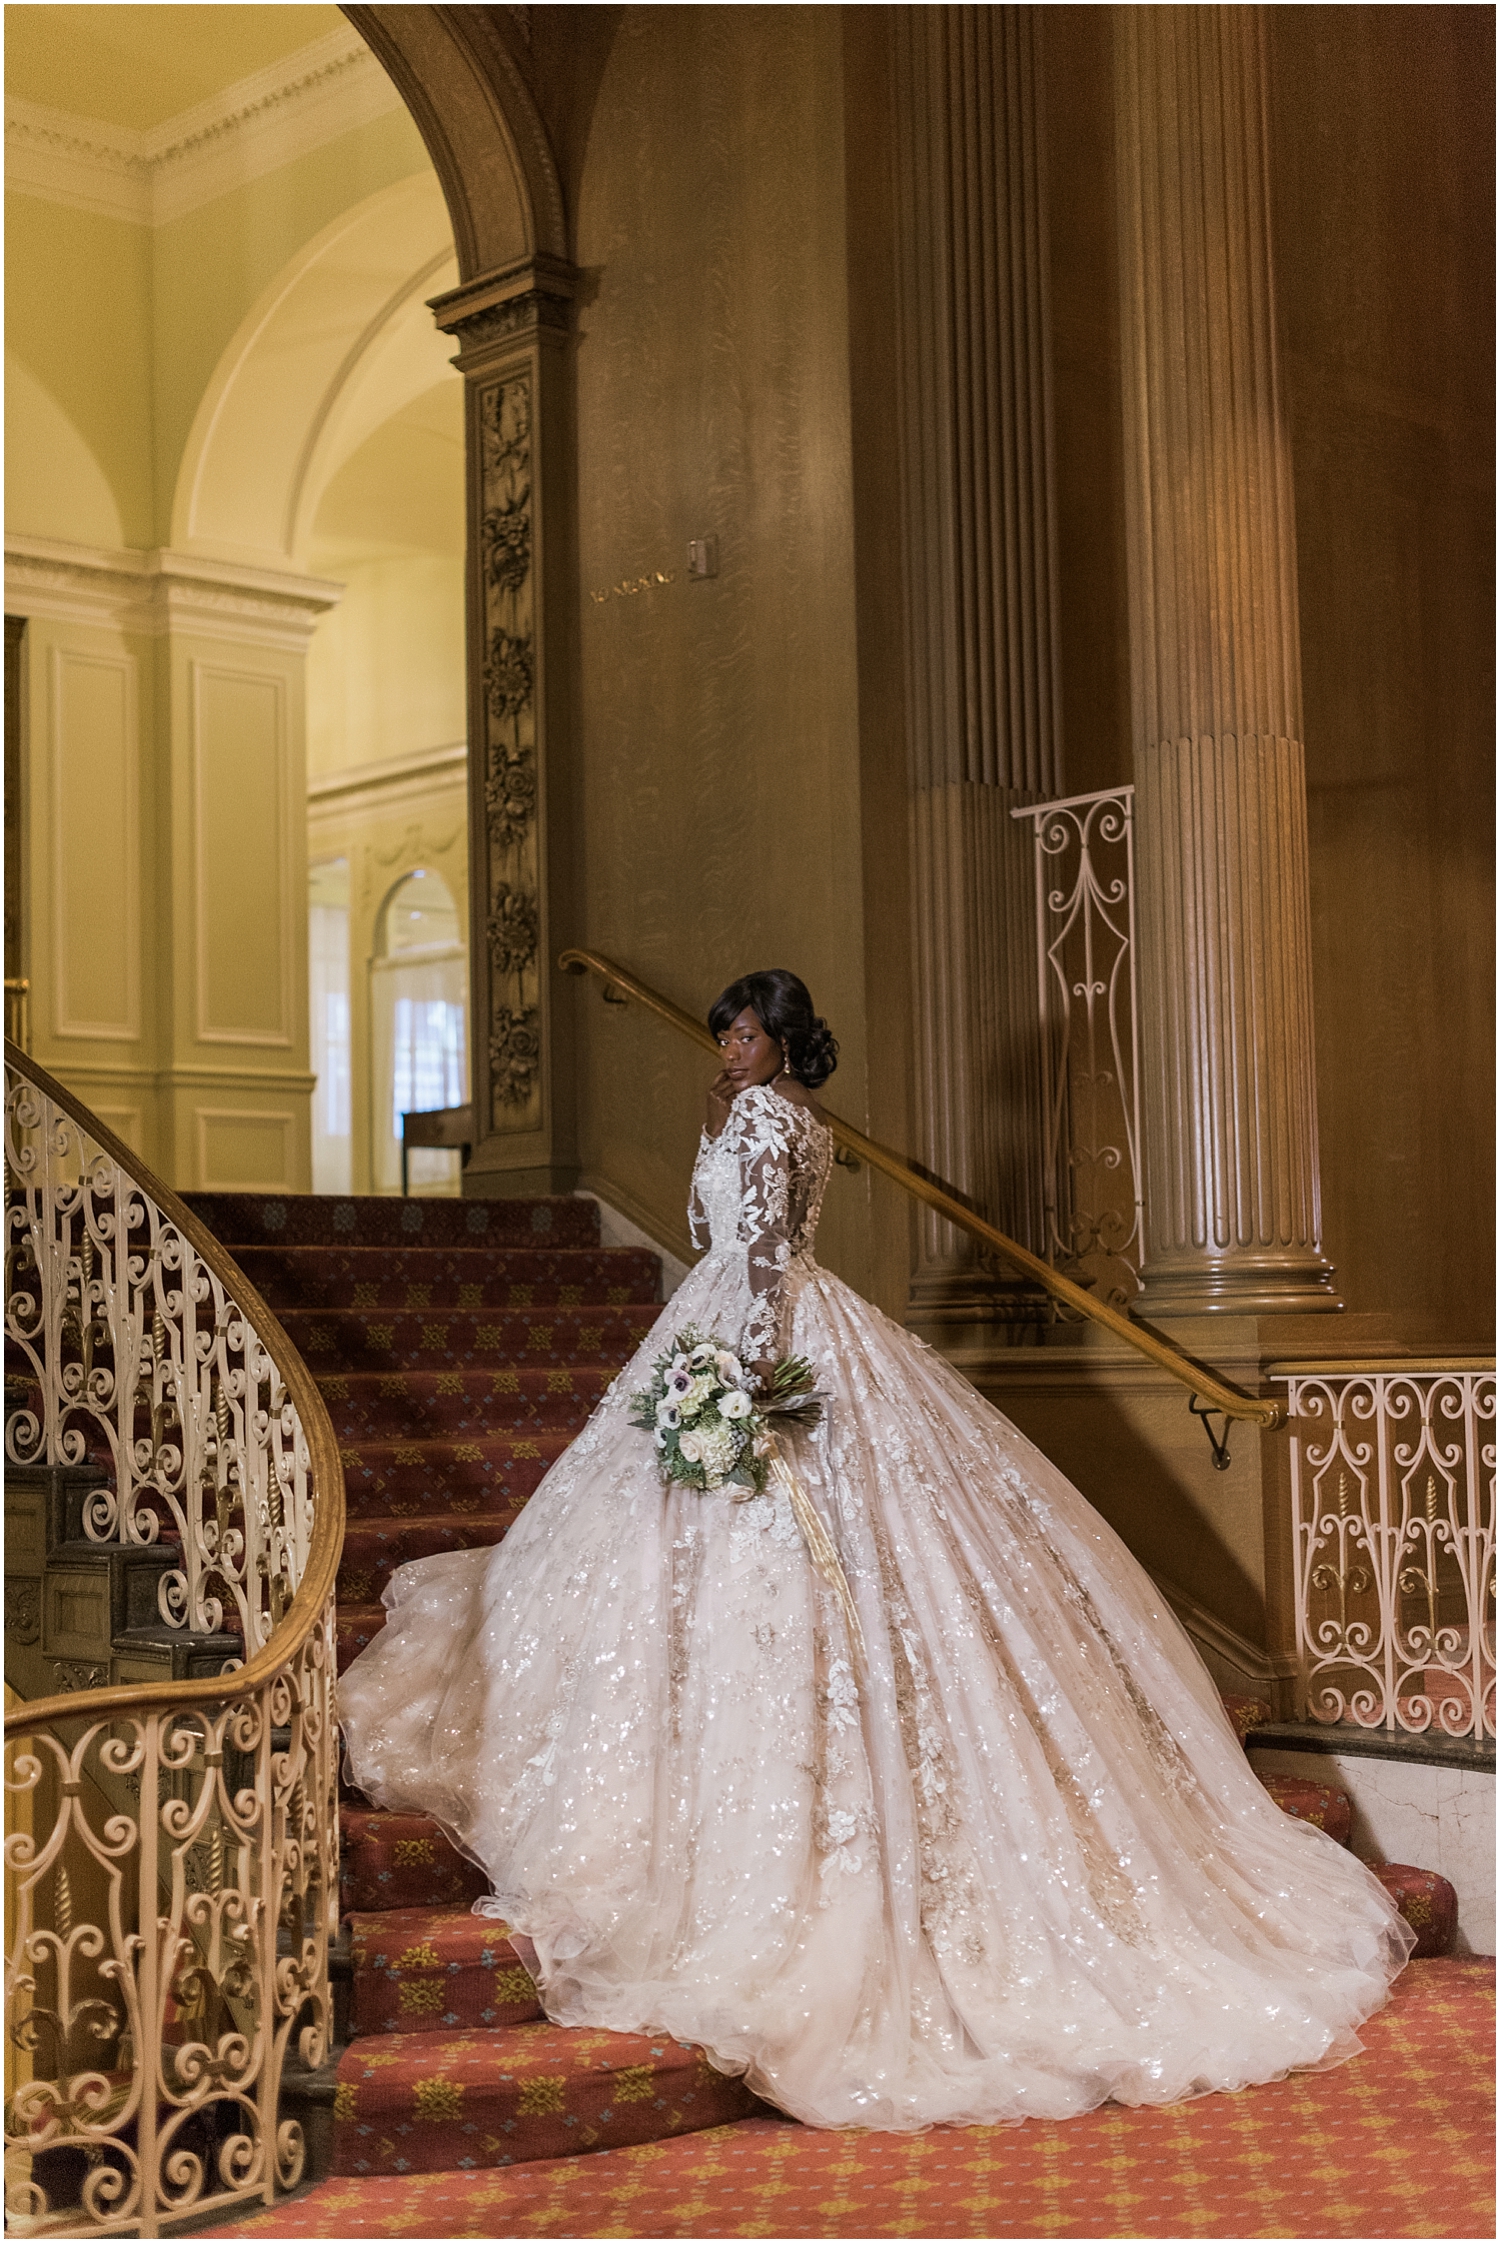 Bride on The grand staircase at the fairmont olympic hotel